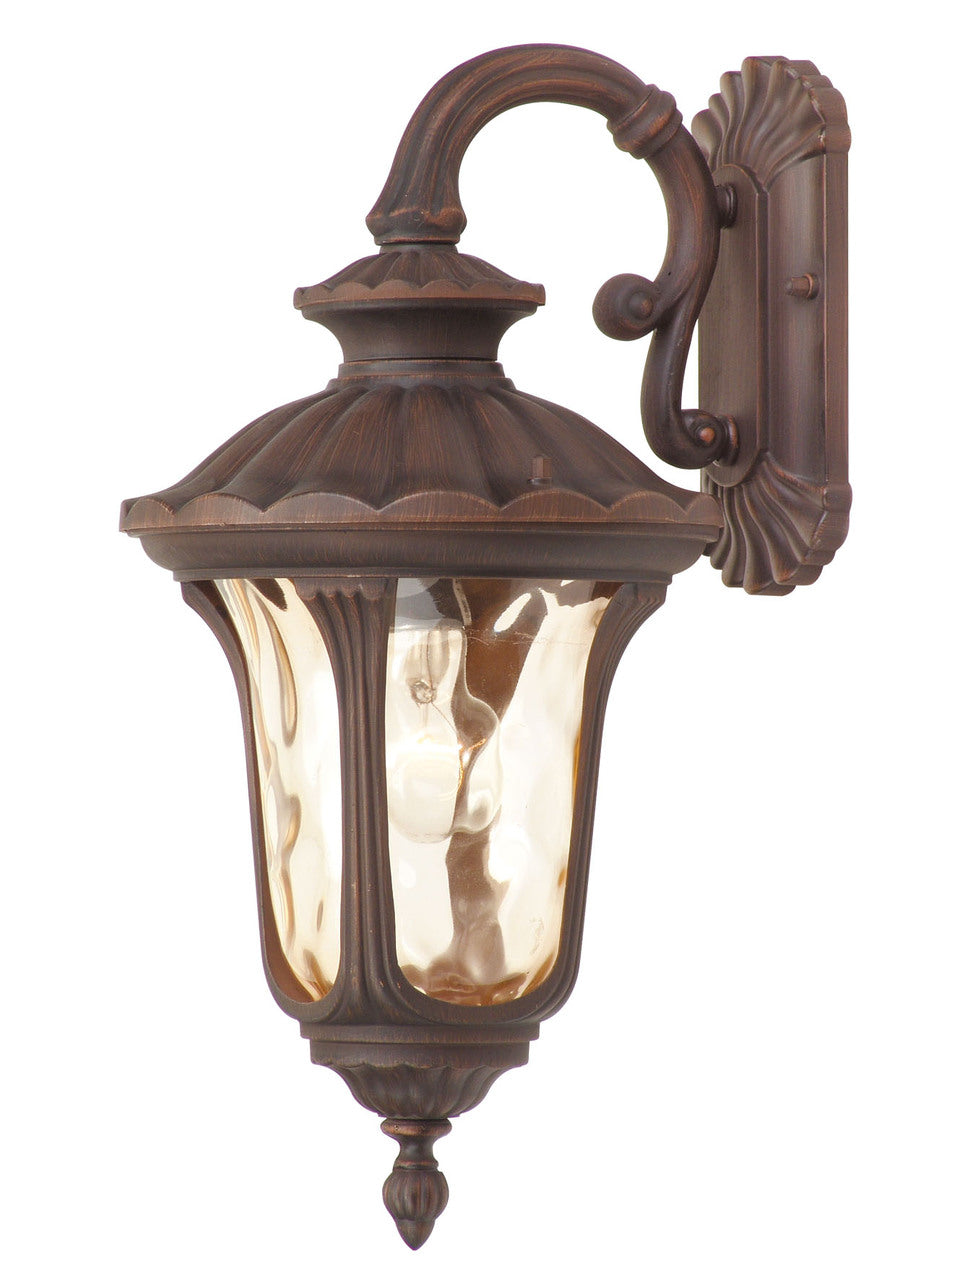 LIVEX Lighting 7653-58 Oxford Outdoor Wall Lantern in Imperial Bronze (1 Light)